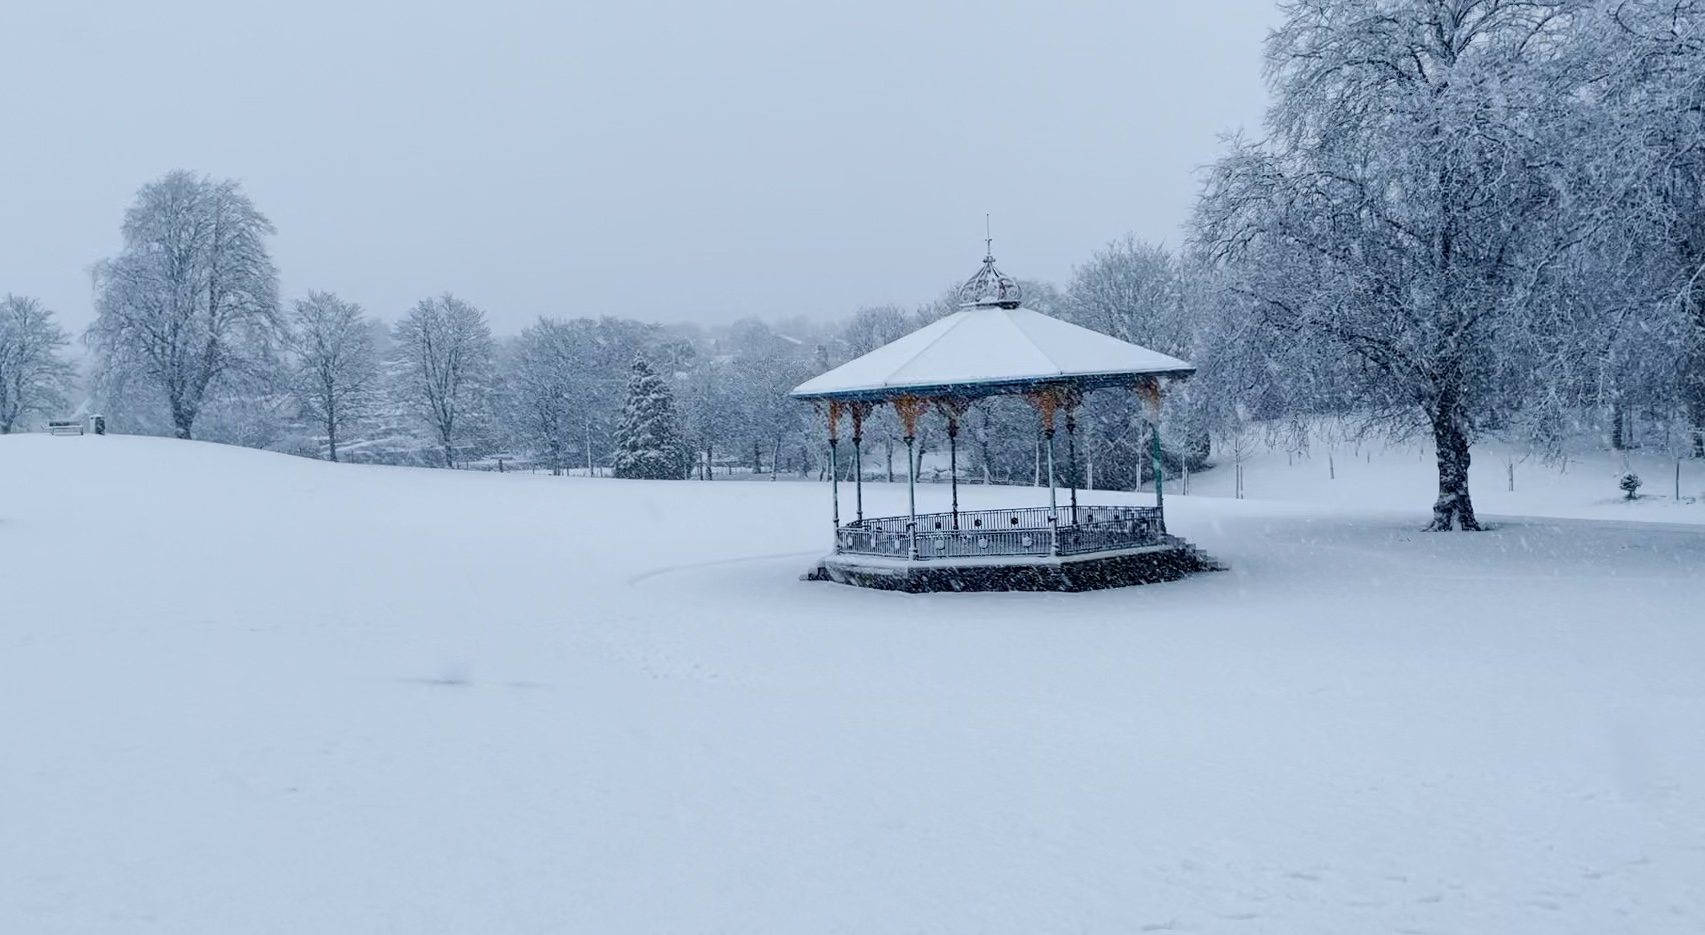 Strathaven: Snow covered park in South Lanarkshire. 